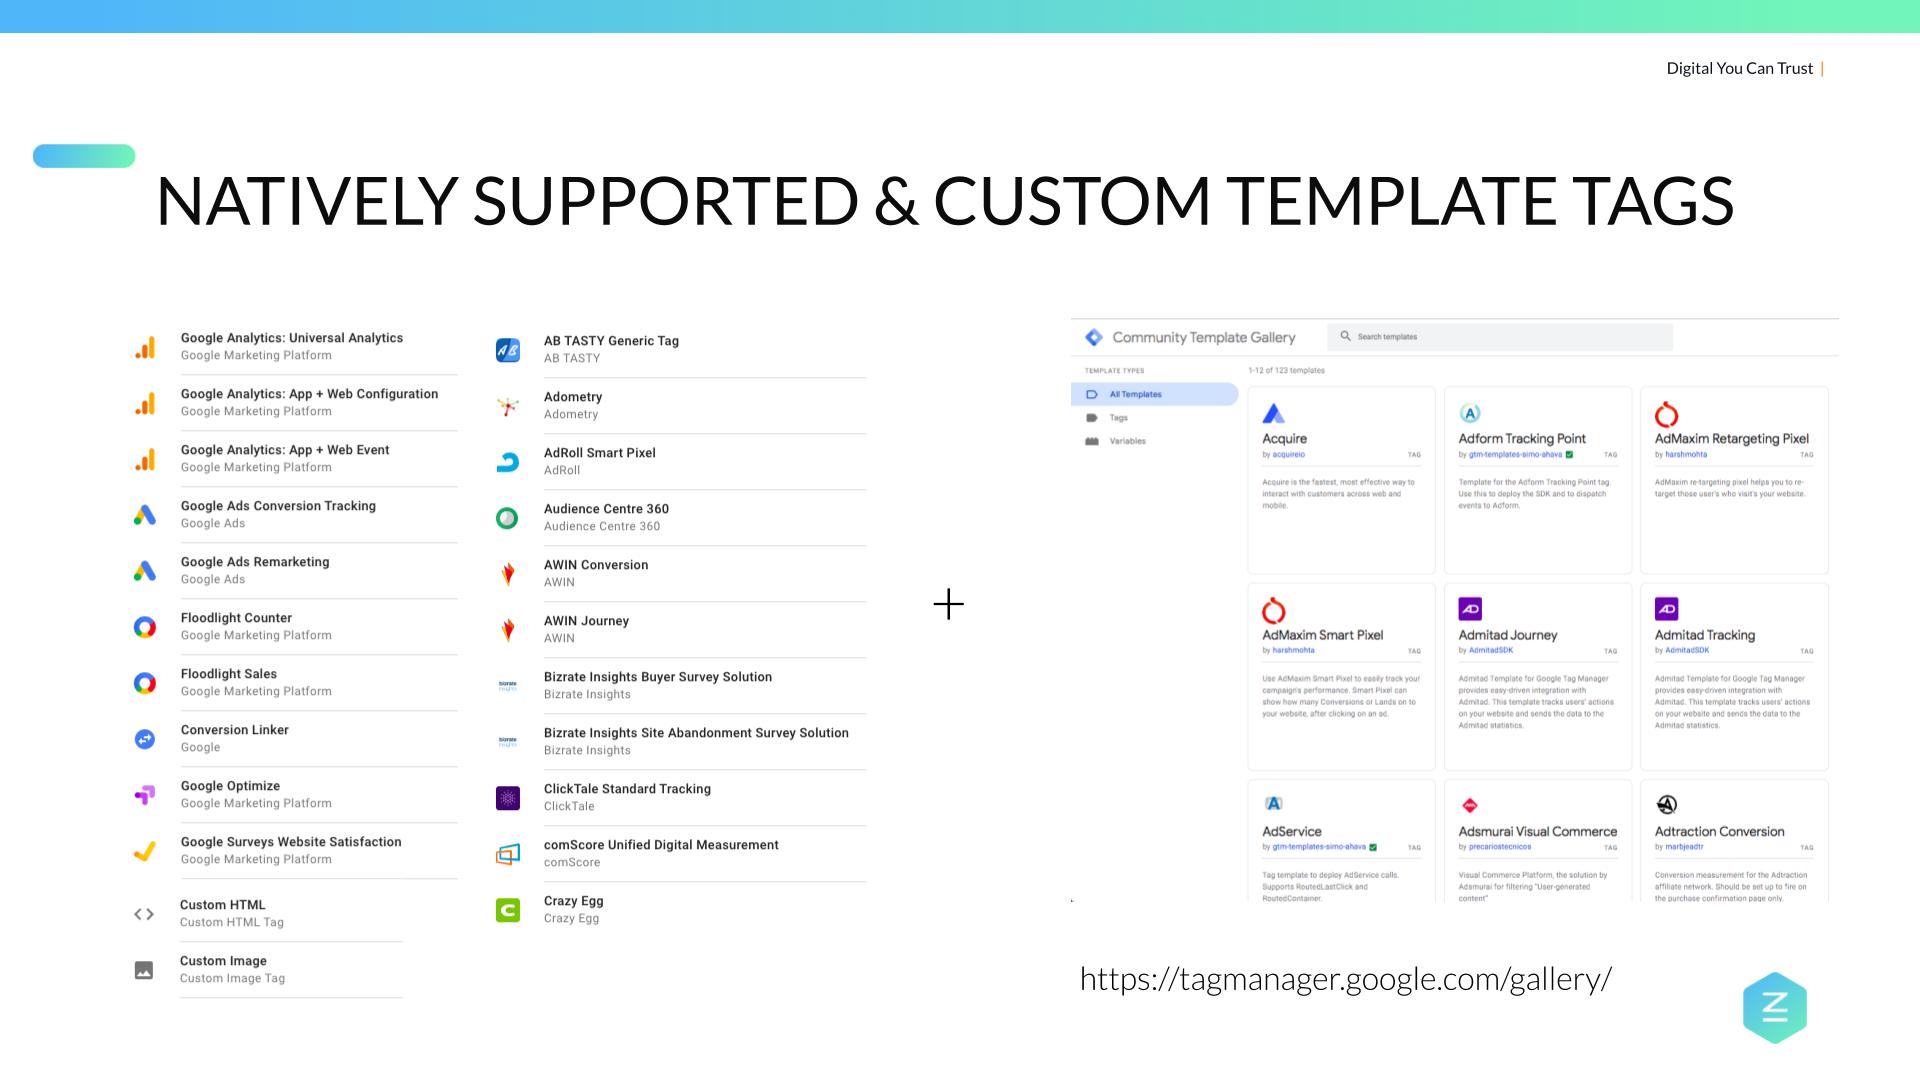 Natively supported and custom template tags in Google Tag Manager